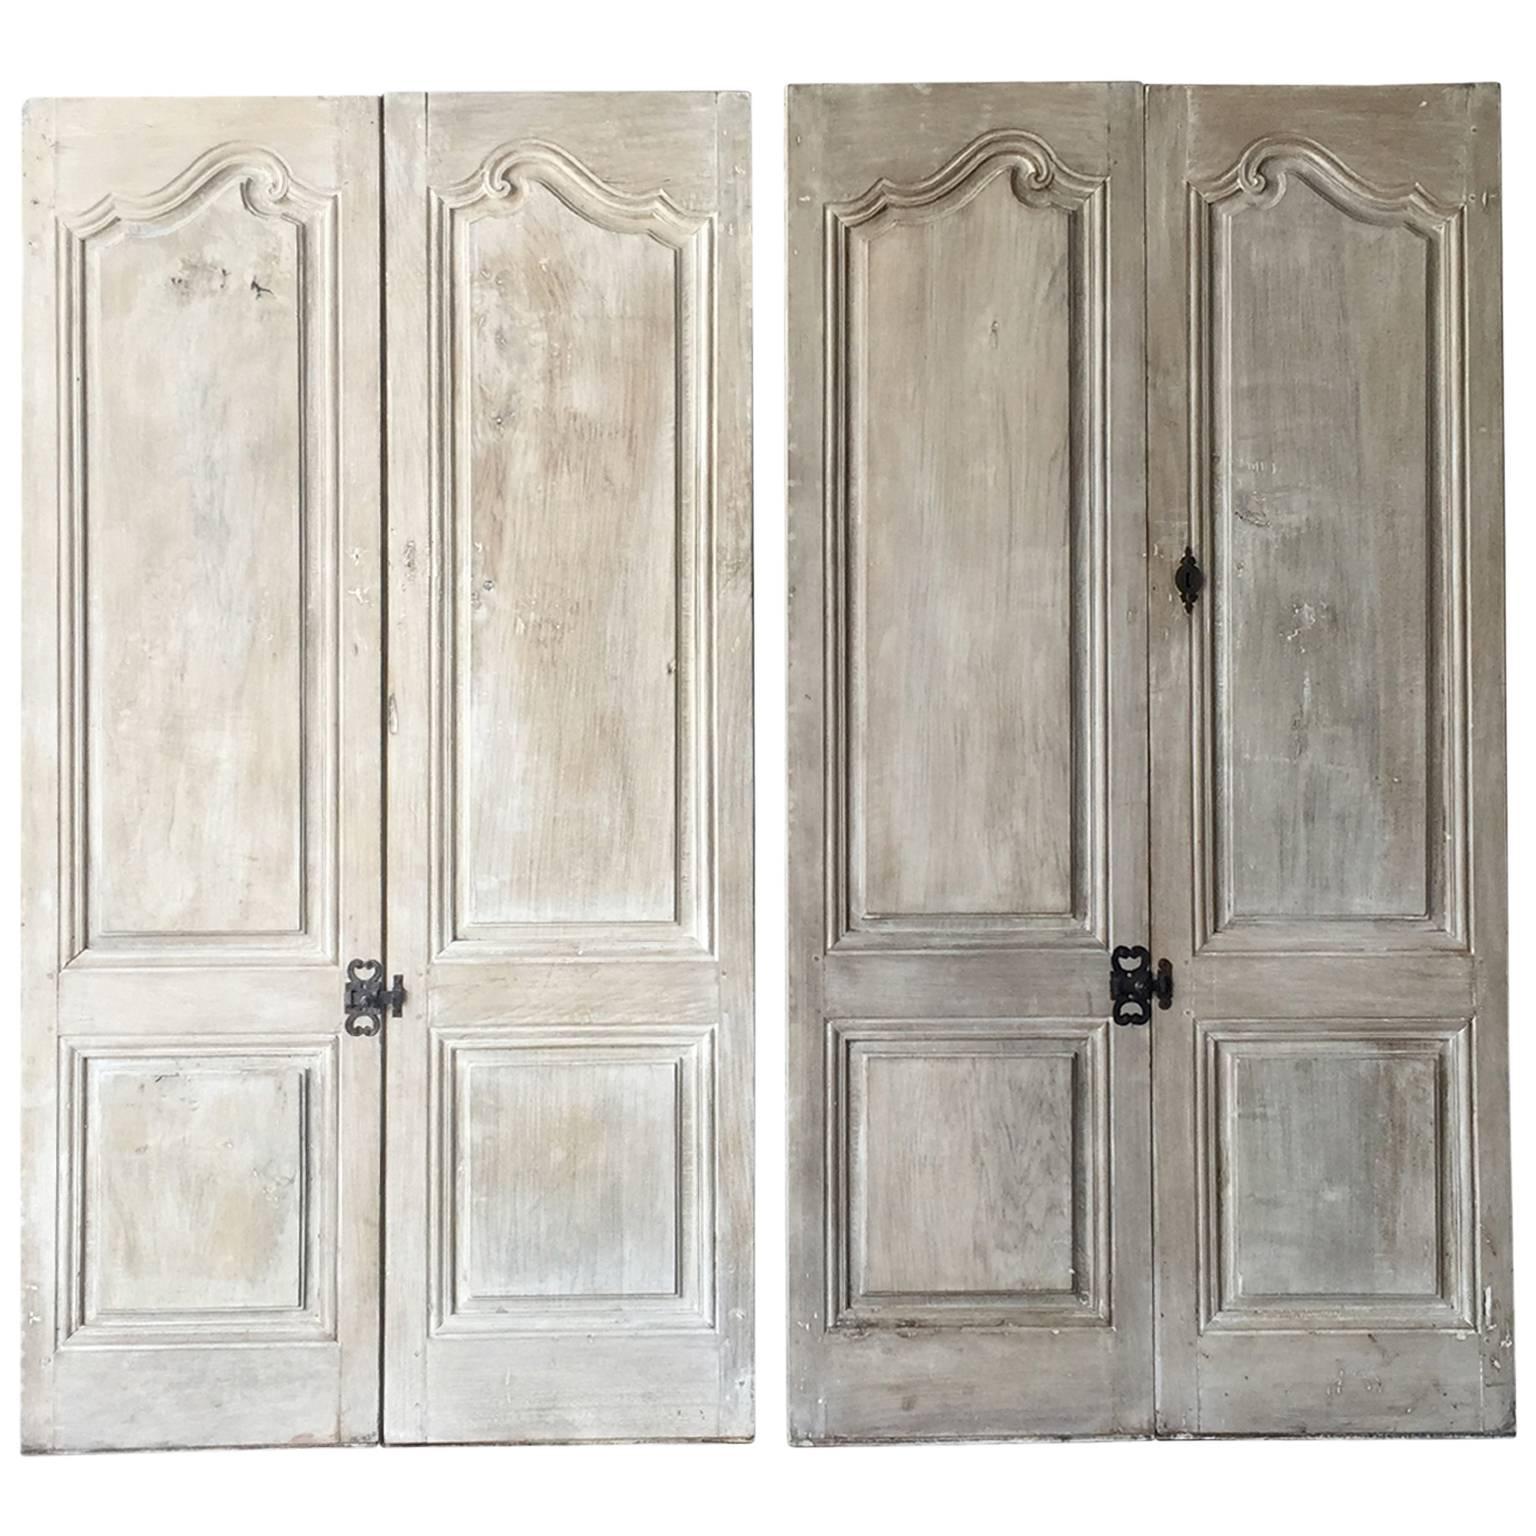 Two Pairs of Matching Antique Cabinet Doors with Reclaimed Hardware